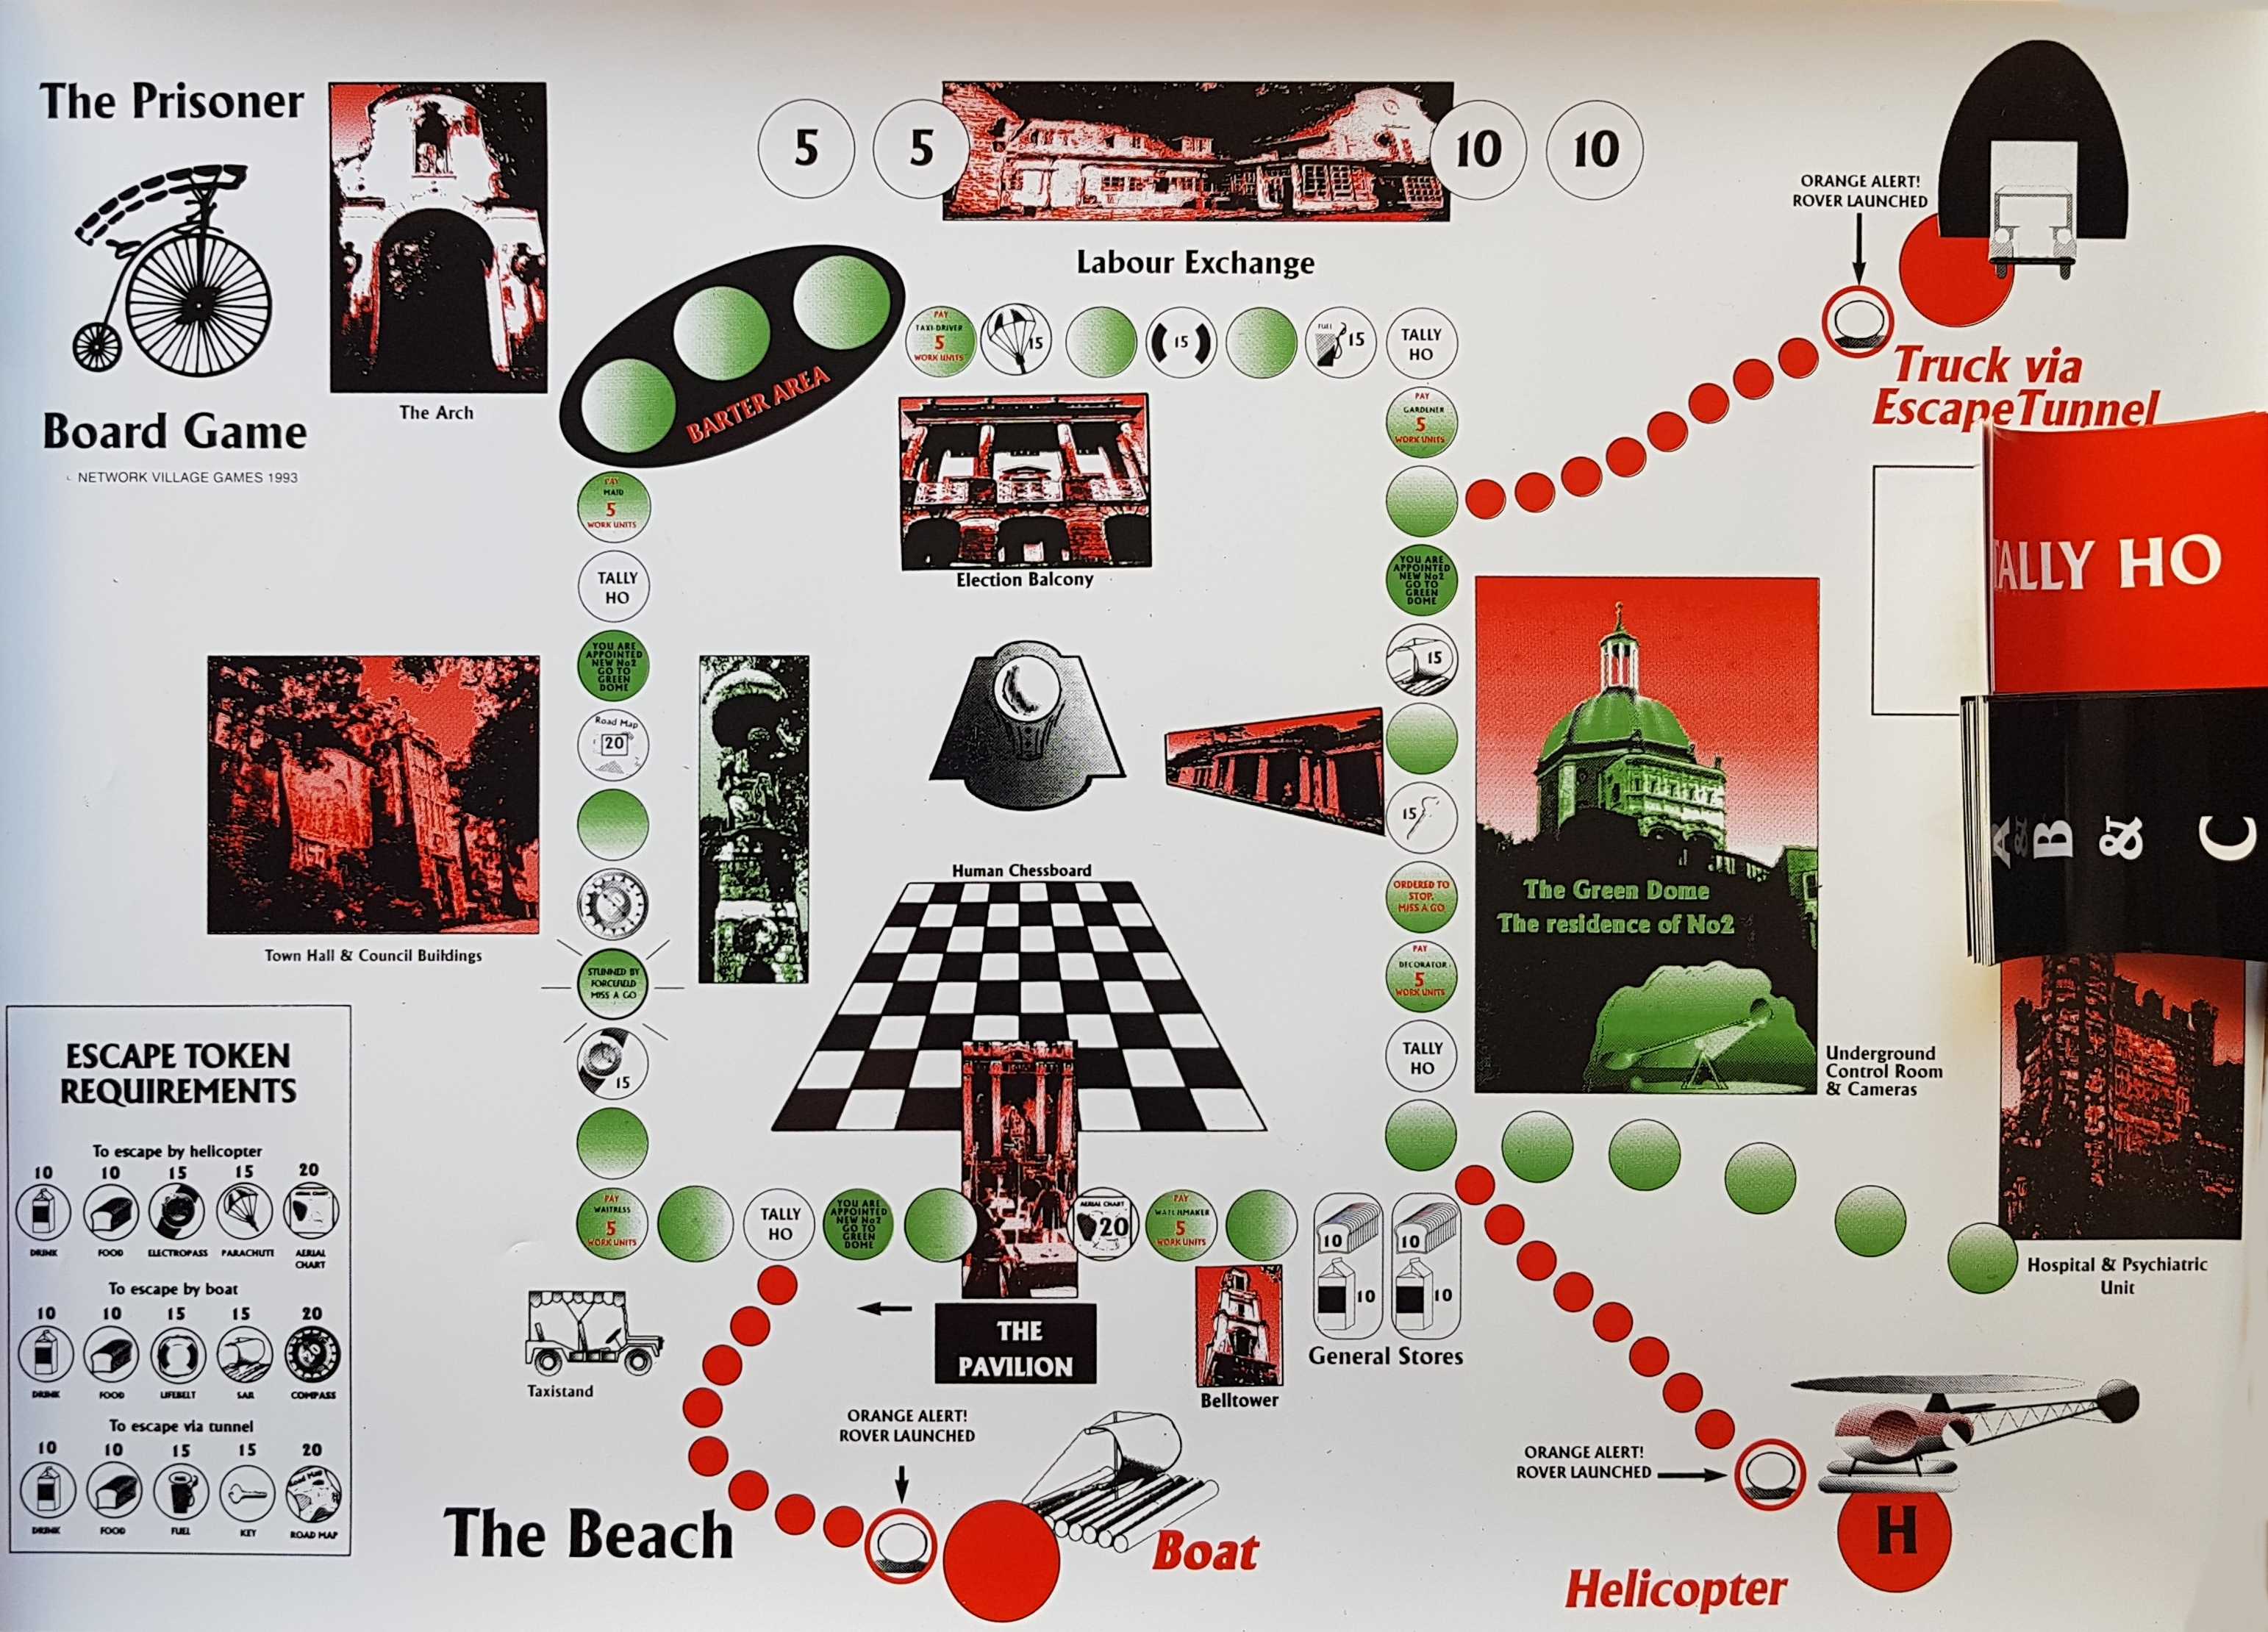 Picture of The Prisoner - Board Game by artist Unknown from ITV, Channel 4 and Channel 5 anything_else library